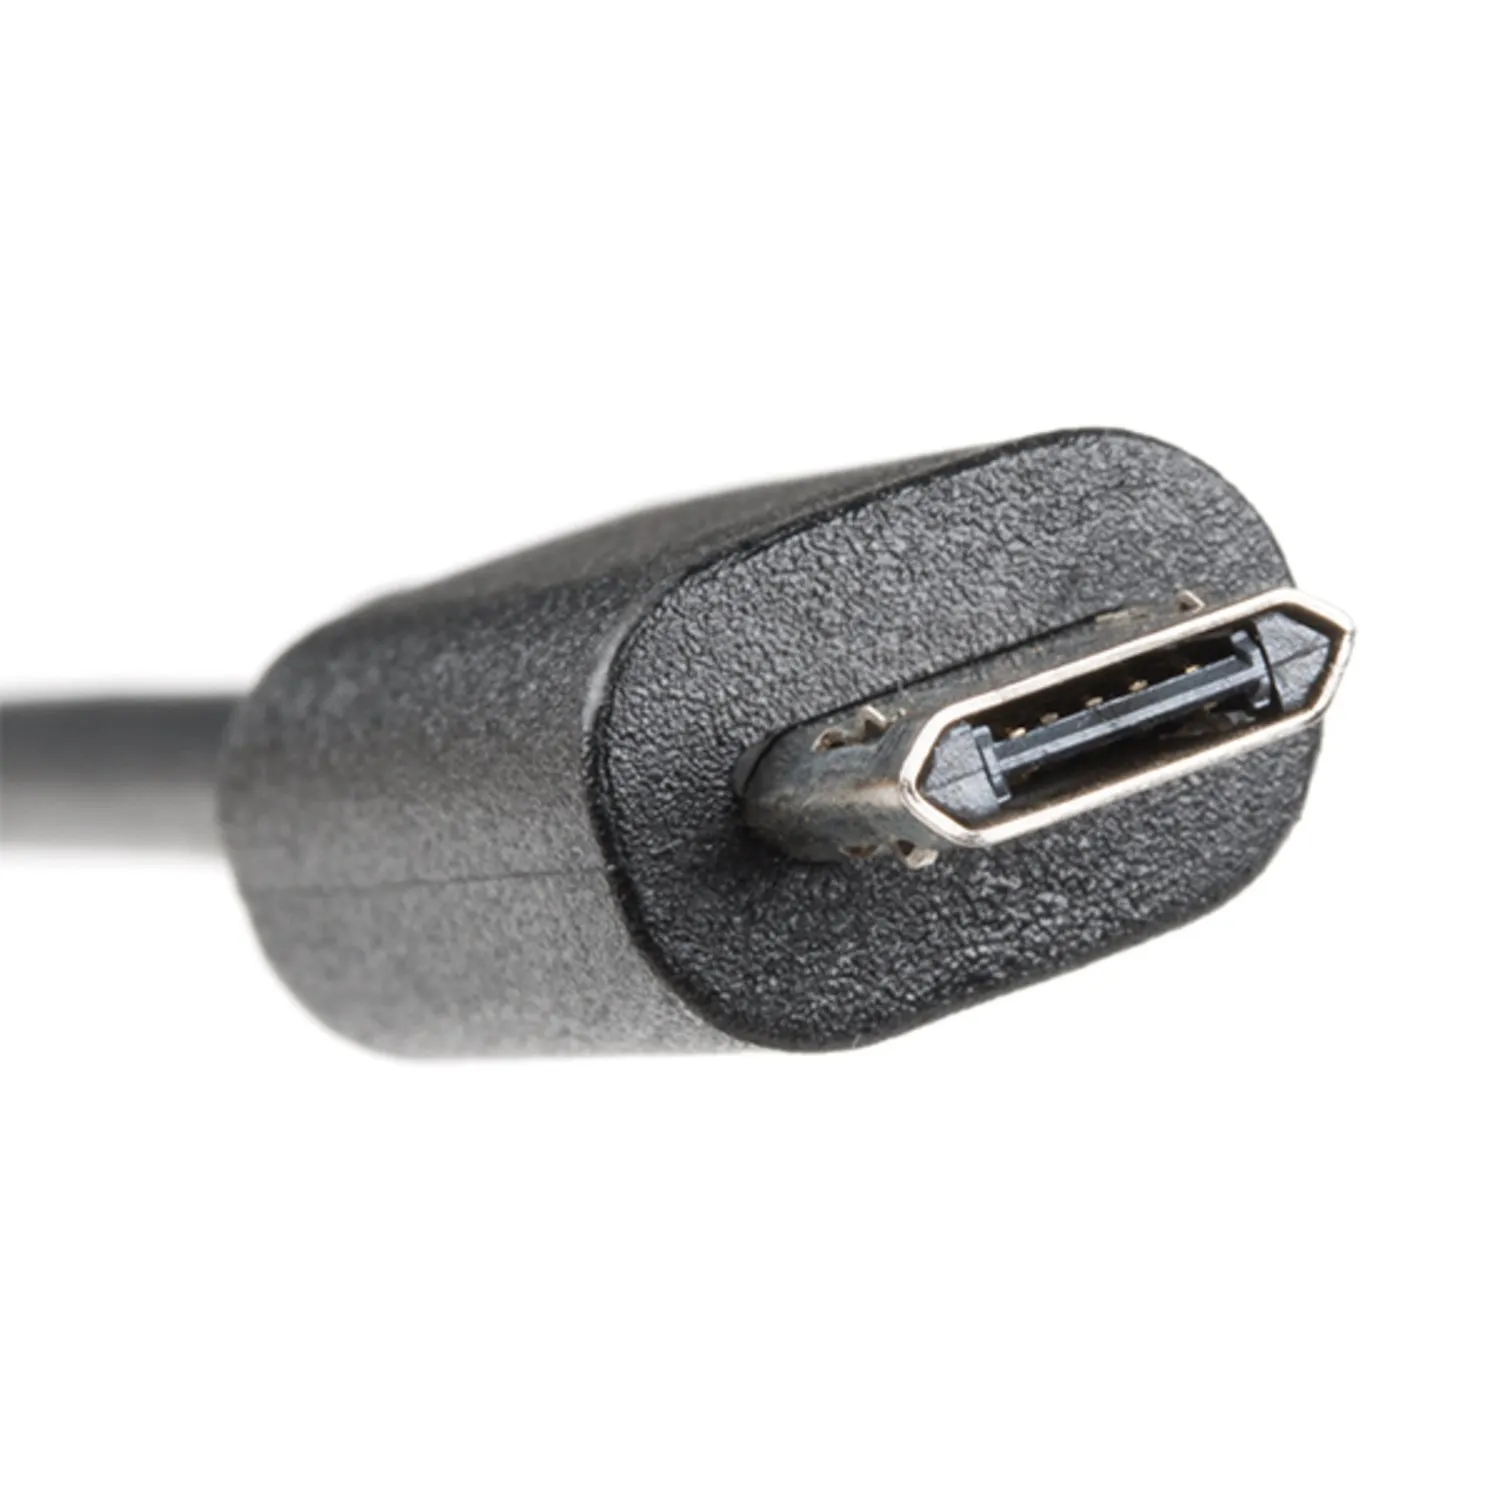 Photo of Reversible USB A to Reversible Micro-B Cable - 2m